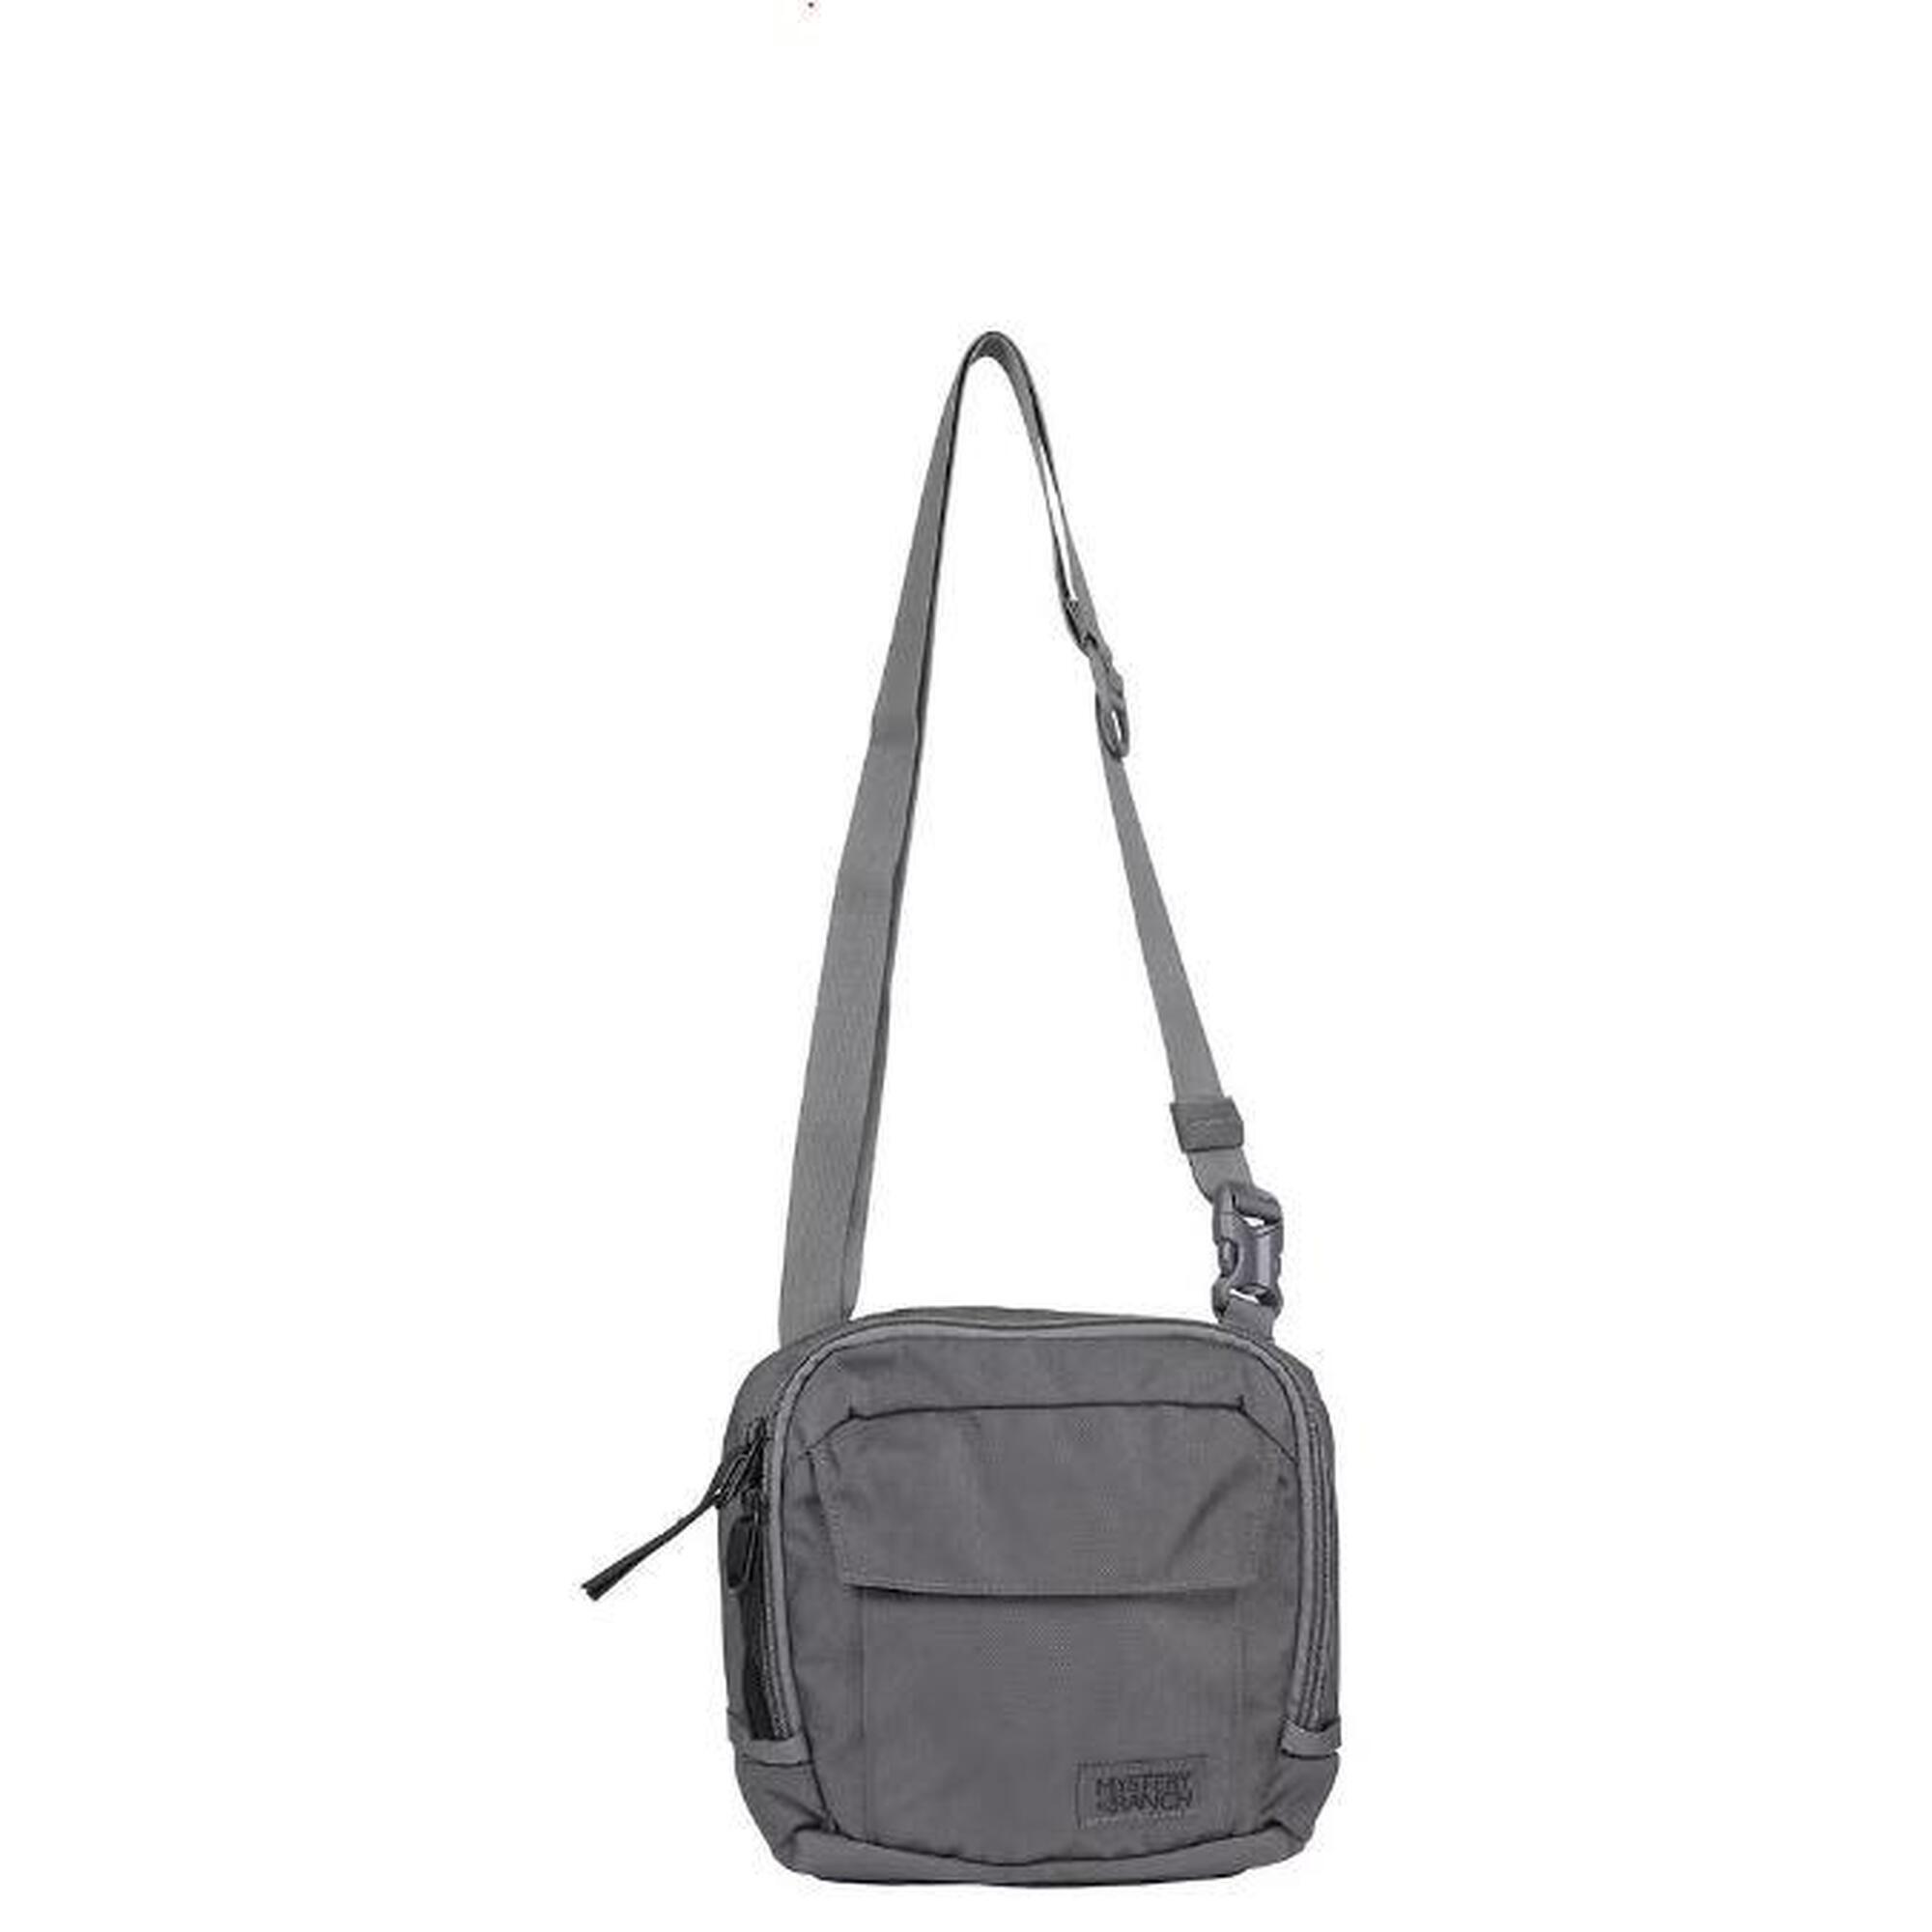 District 4 Hiking Backpack 4L - Shadow